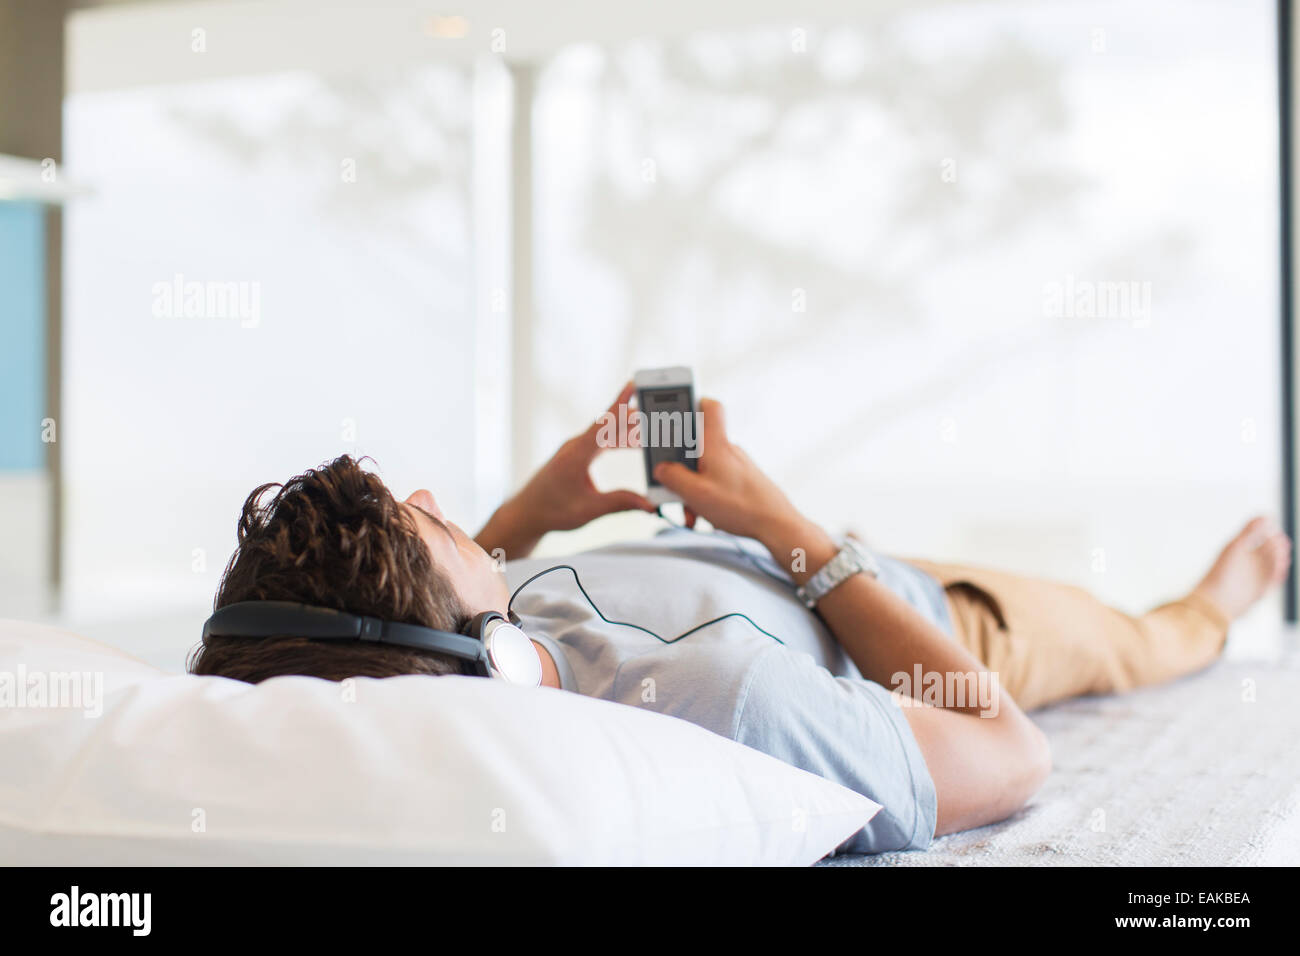 Man listening to music while lying on bed Stock Photo